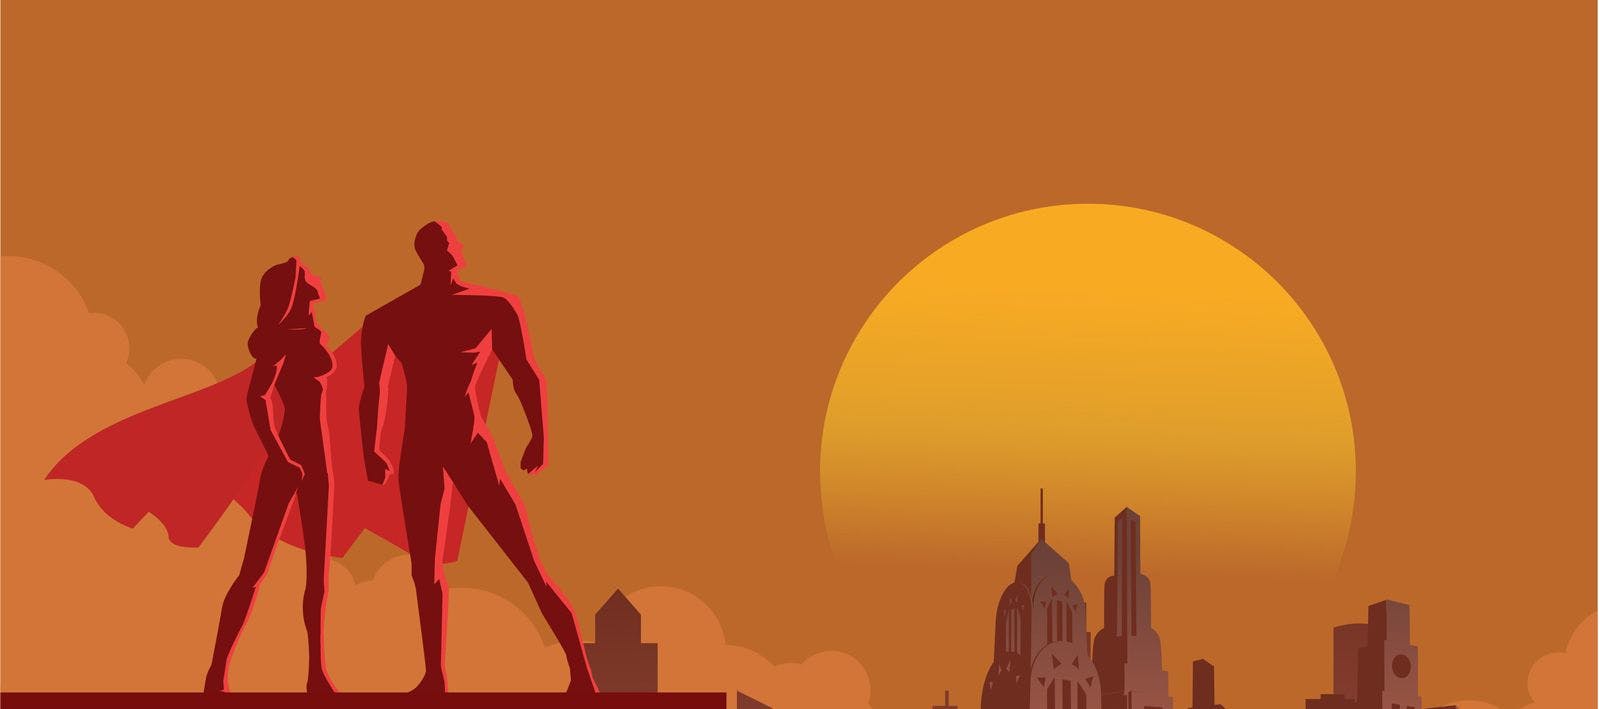 A vector illustration of two superheroes standing on a rooftop looking over a city